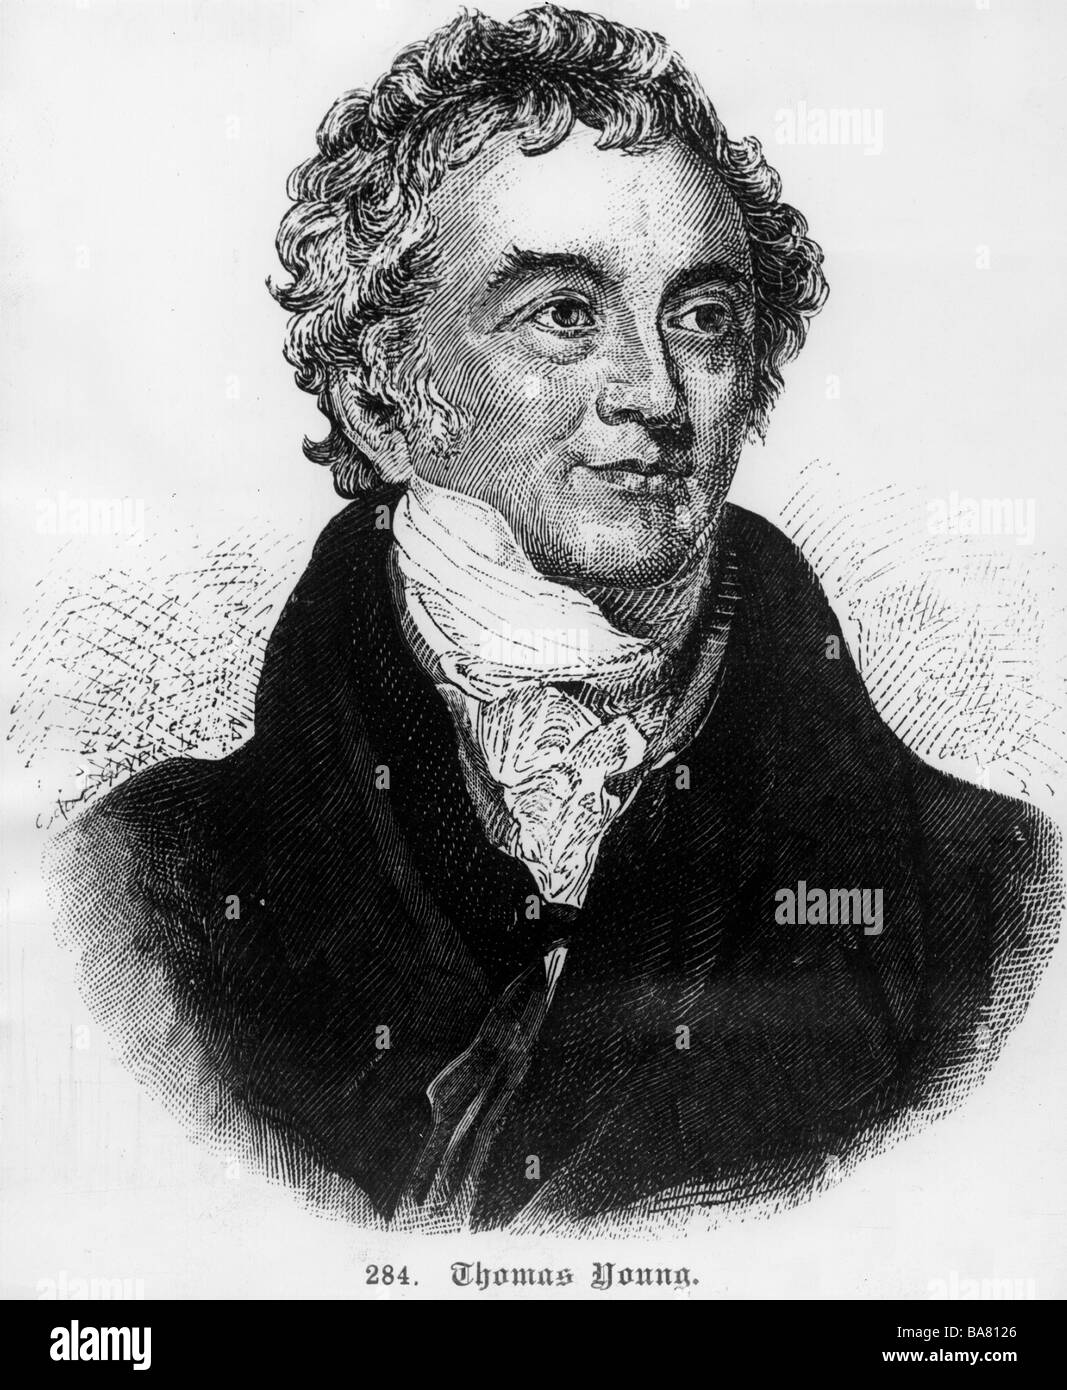 Young, Thomas, 13.6.1773 - 10.5.1829, British scientist and philosopher, half length, wood engraving by E. Geyer after painting by Lawrence, 19th century, Stock Photo